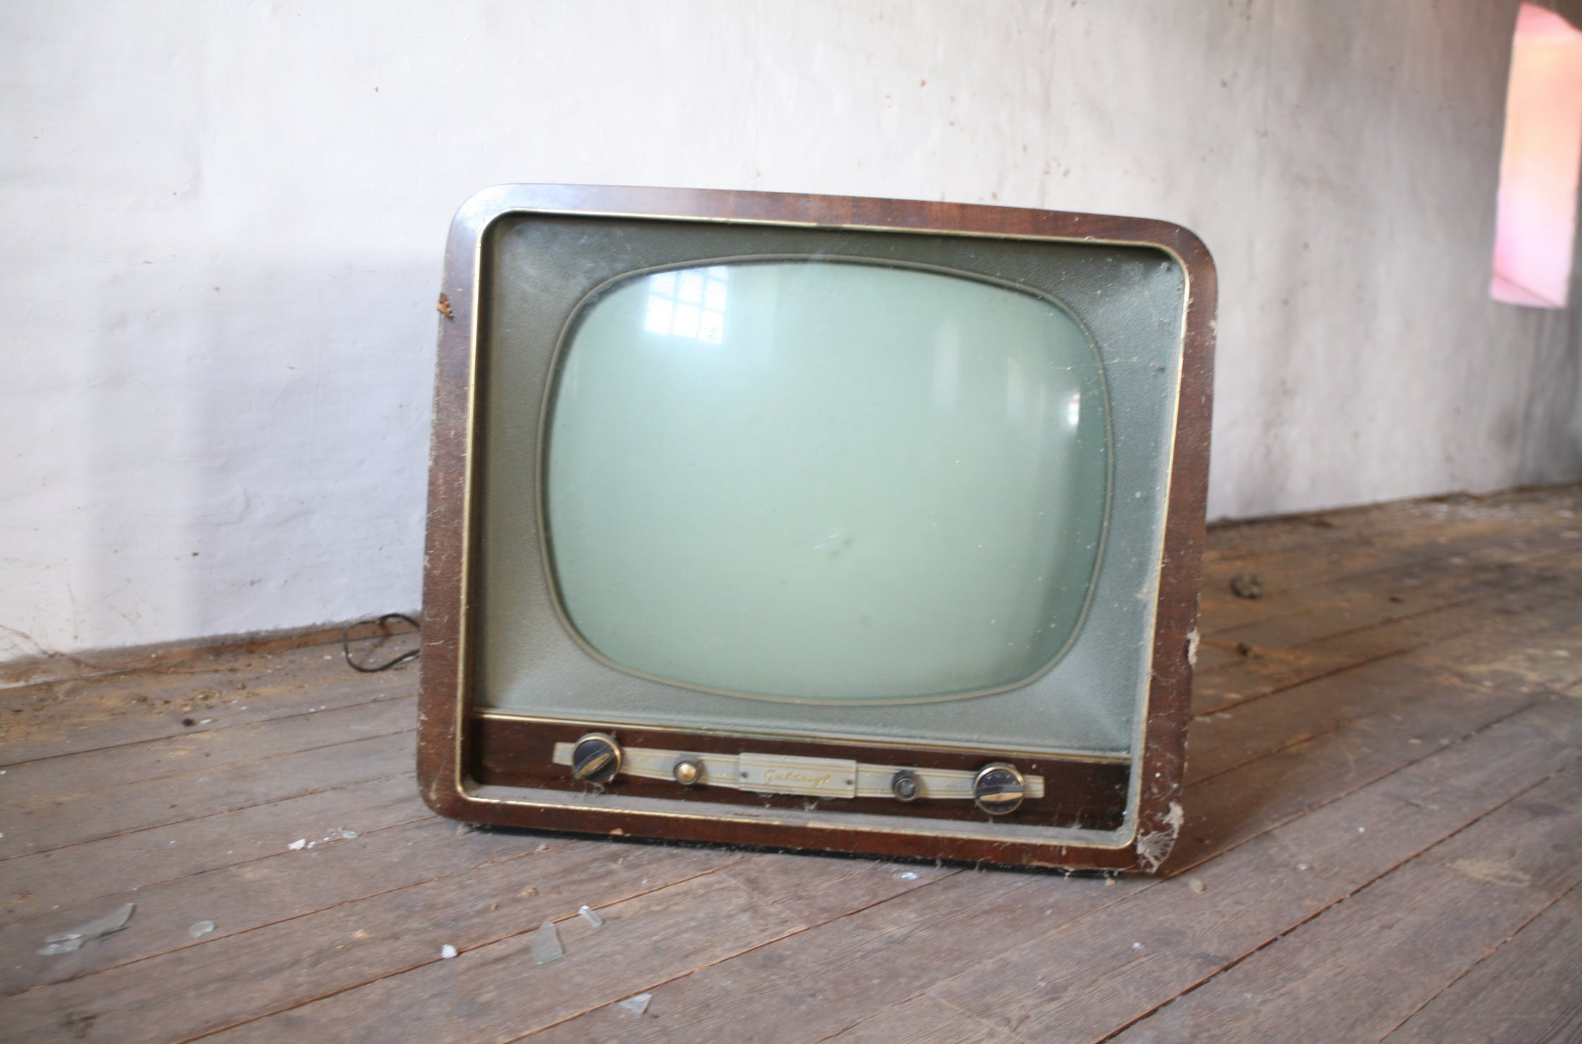 An old TV on a wood floor, indicating dated traditional marketing methods.